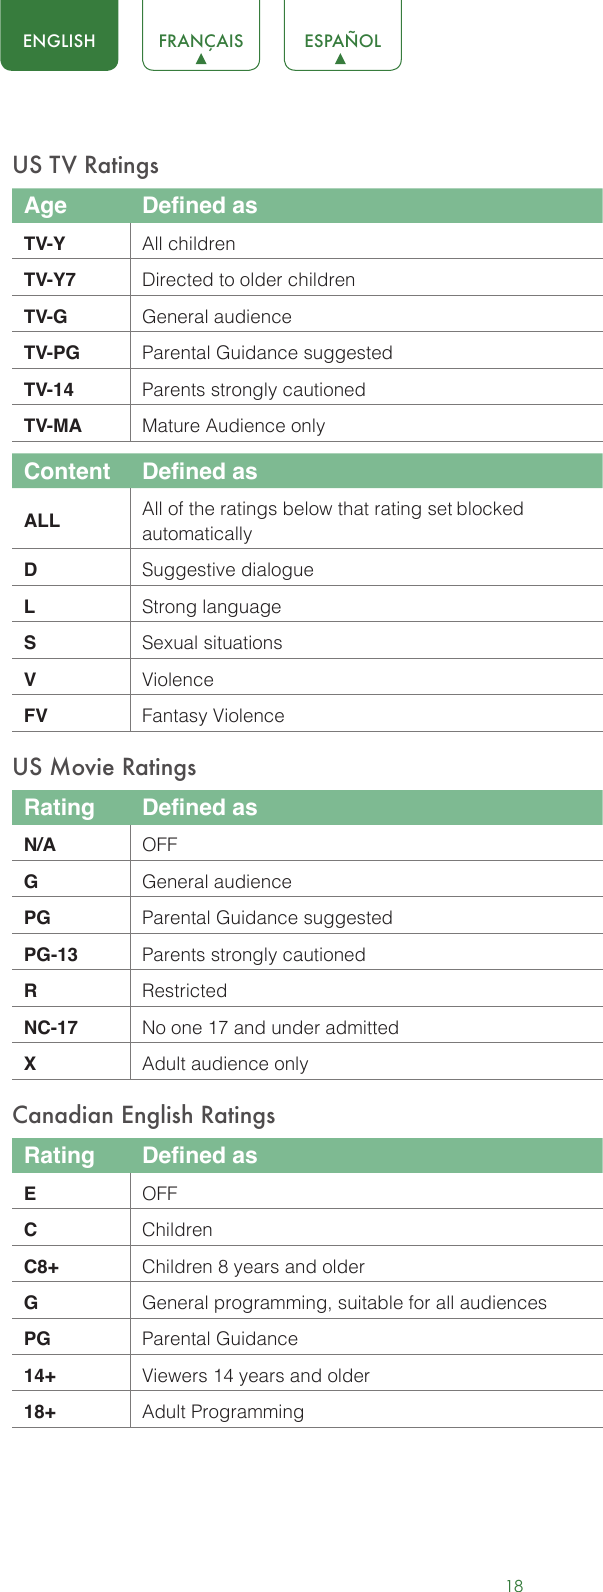 18ENGLISH FRANÇAIS ESPAÑOLUS TV RatingsAge Defined asTV-Y All childrenTV-Y7 Directed to older childrenTV-G General audienceTV-PG Parental Guidance suggestedTV-14 Parents strongly cautionedTV-MA Mature Audience onlyContent Defined asALL All of the ratings below that rating set blocked automaticallyDSuggestive dialogueLStrong languageSSexual situationsVViolenceFV Fantasy ViolenceUS Movie RatingsRating Defined asN/A OFFGGeneral audiencePG Parental Guidance suggestedPG-13 Parents strongly cautionedRRestrictedNC-17 No one 17 and under admittedXAdult audience onlyCanadian English RatingsRating Defined asEOFFCChildrenC8+ Children 8 years and olderGGeneral programming, suitable for all audiencesPG Parental Guidance14+ Viewers 14 years and older18+ Adult Programming